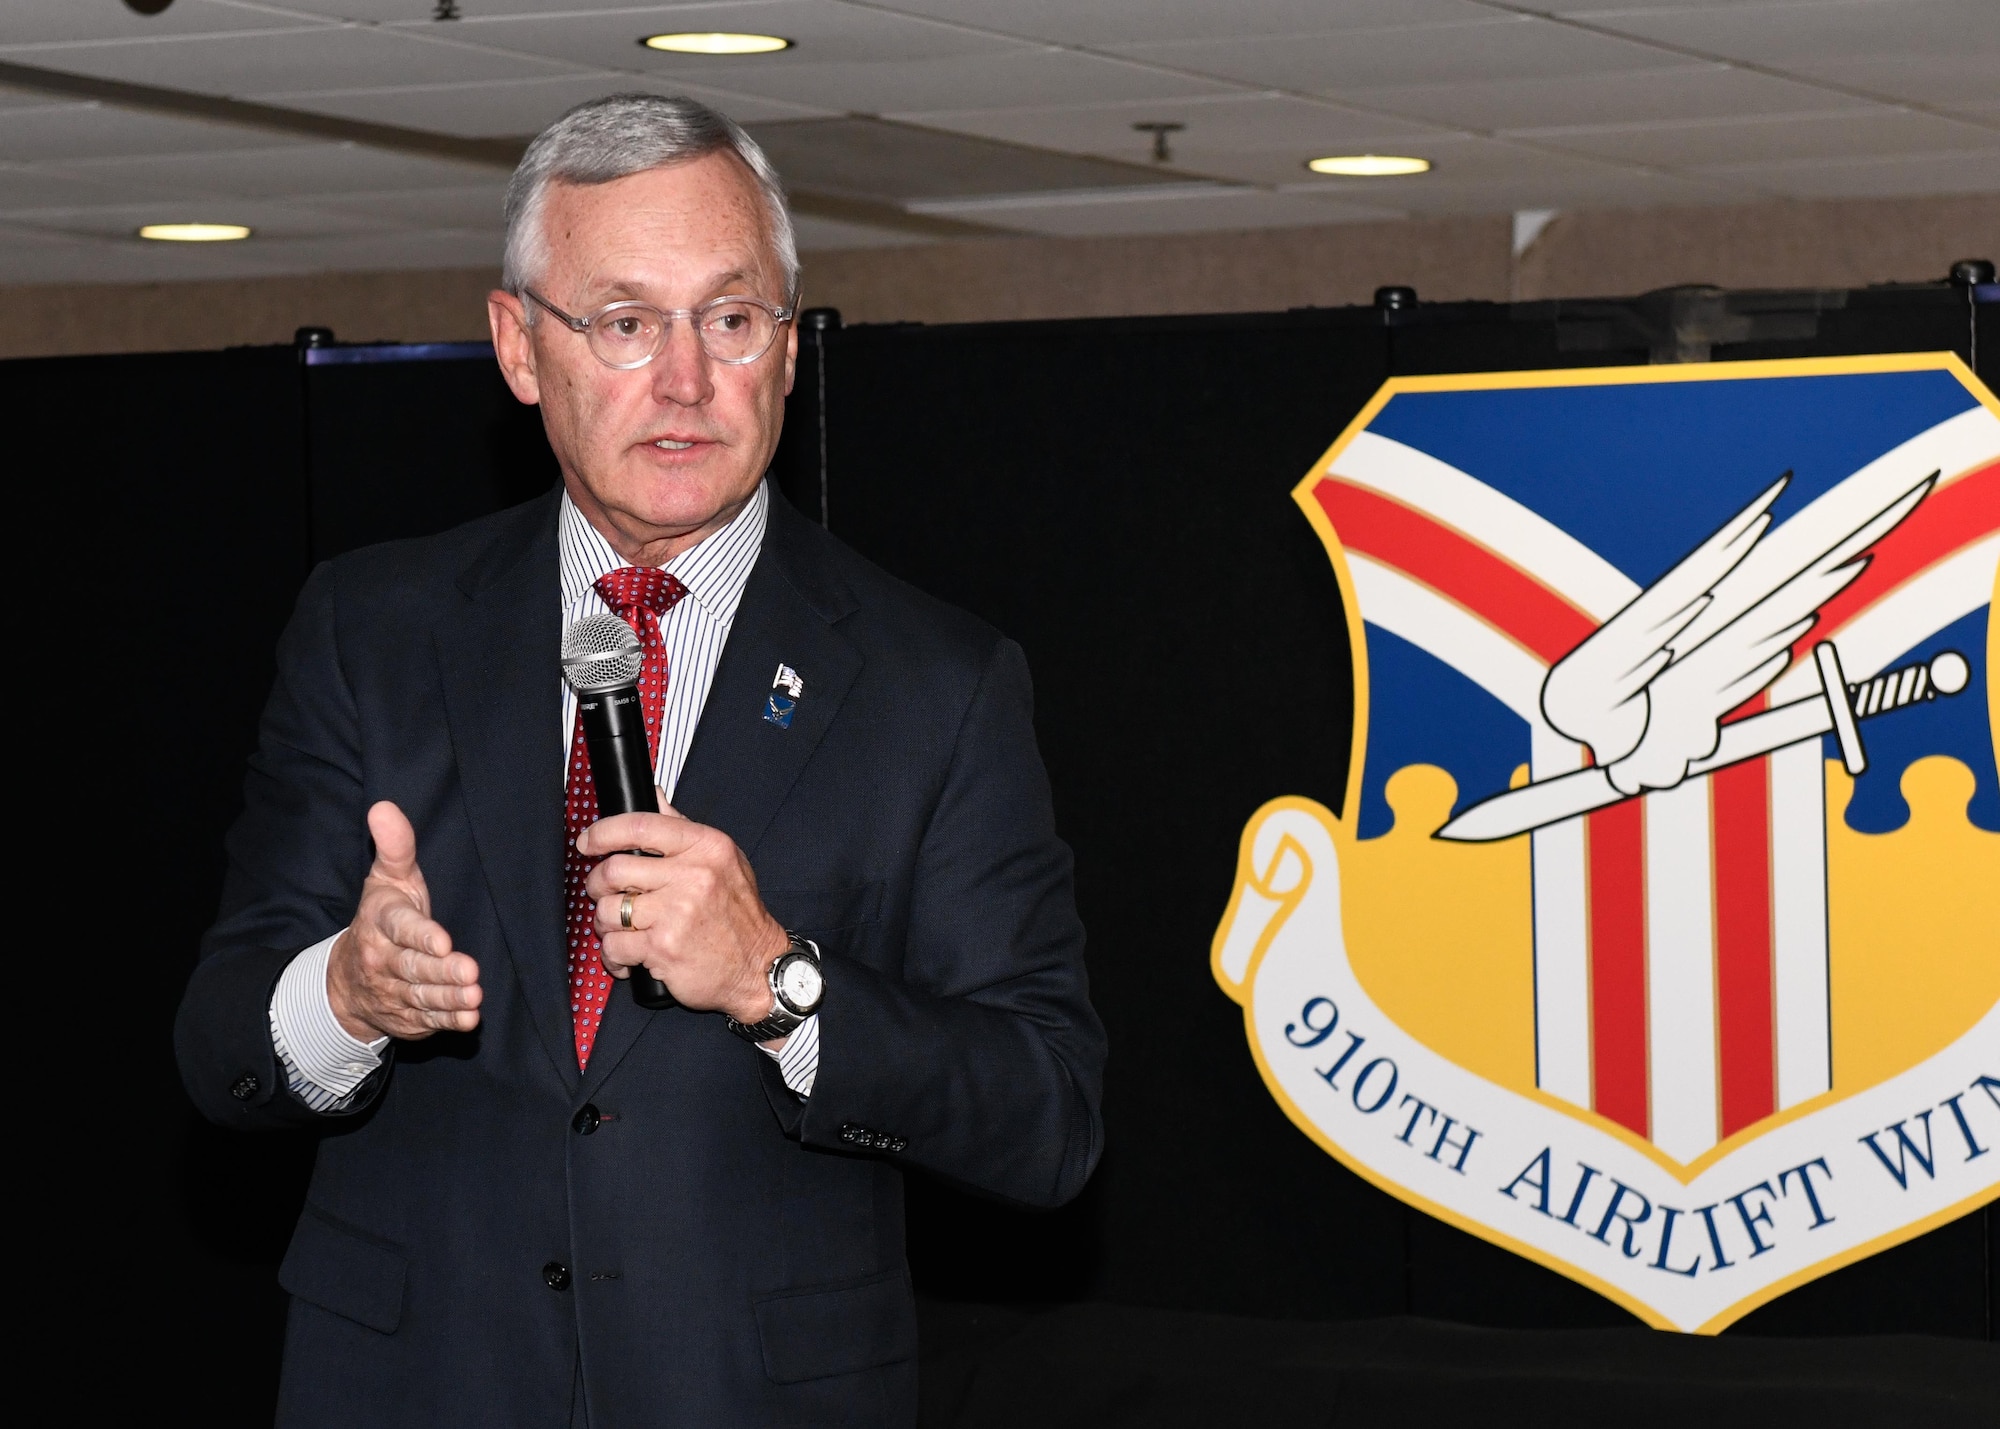 James P. Tressel, the president of Youngstown State University, Delivers a speech at the 910th Airlift Wing annual awards banquet here, March 7, 2020.